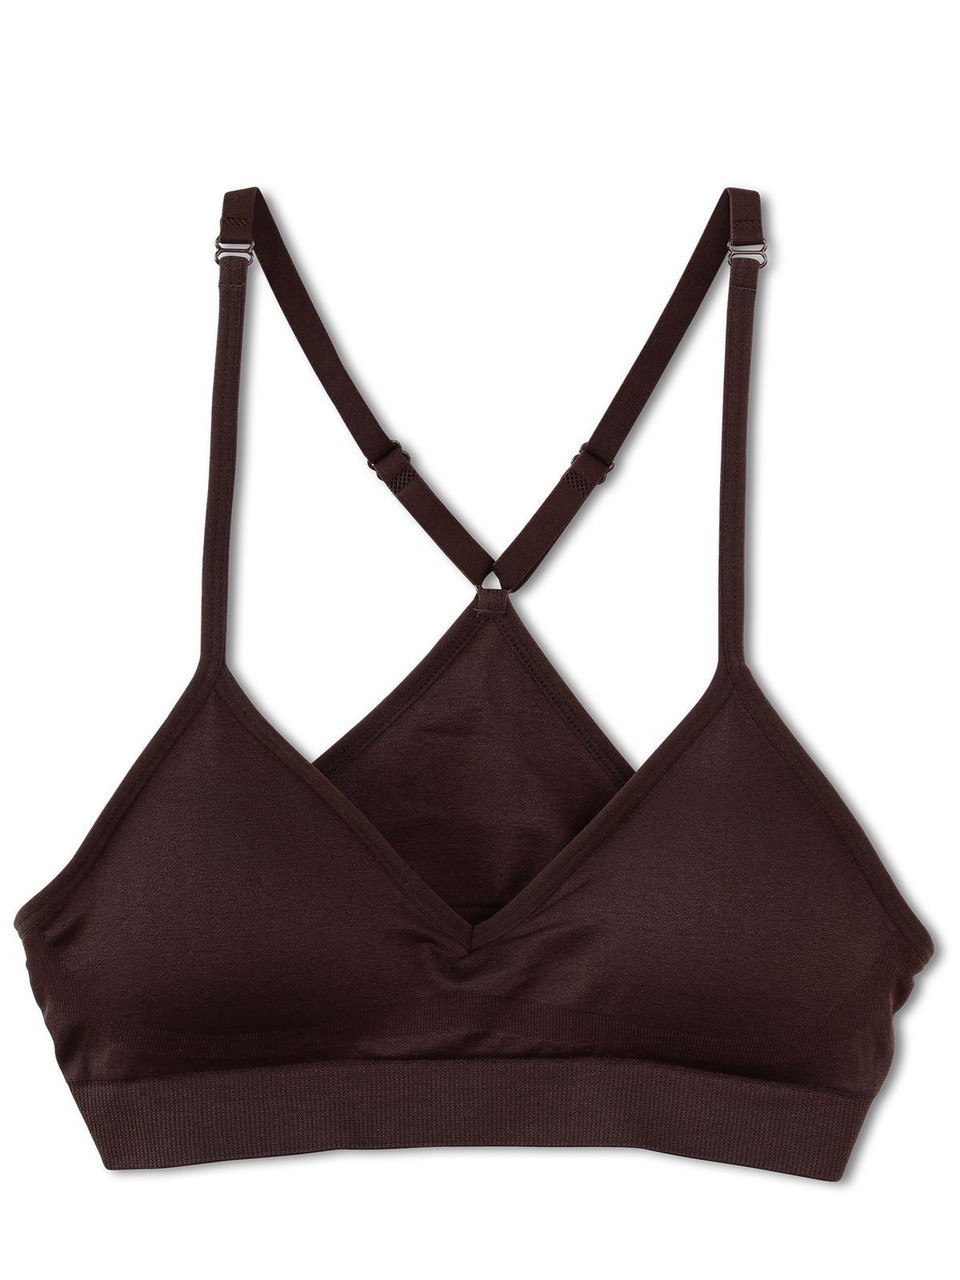 Koral - Tax Blackout Sports Bra - 35 Strong – 35 STRONG